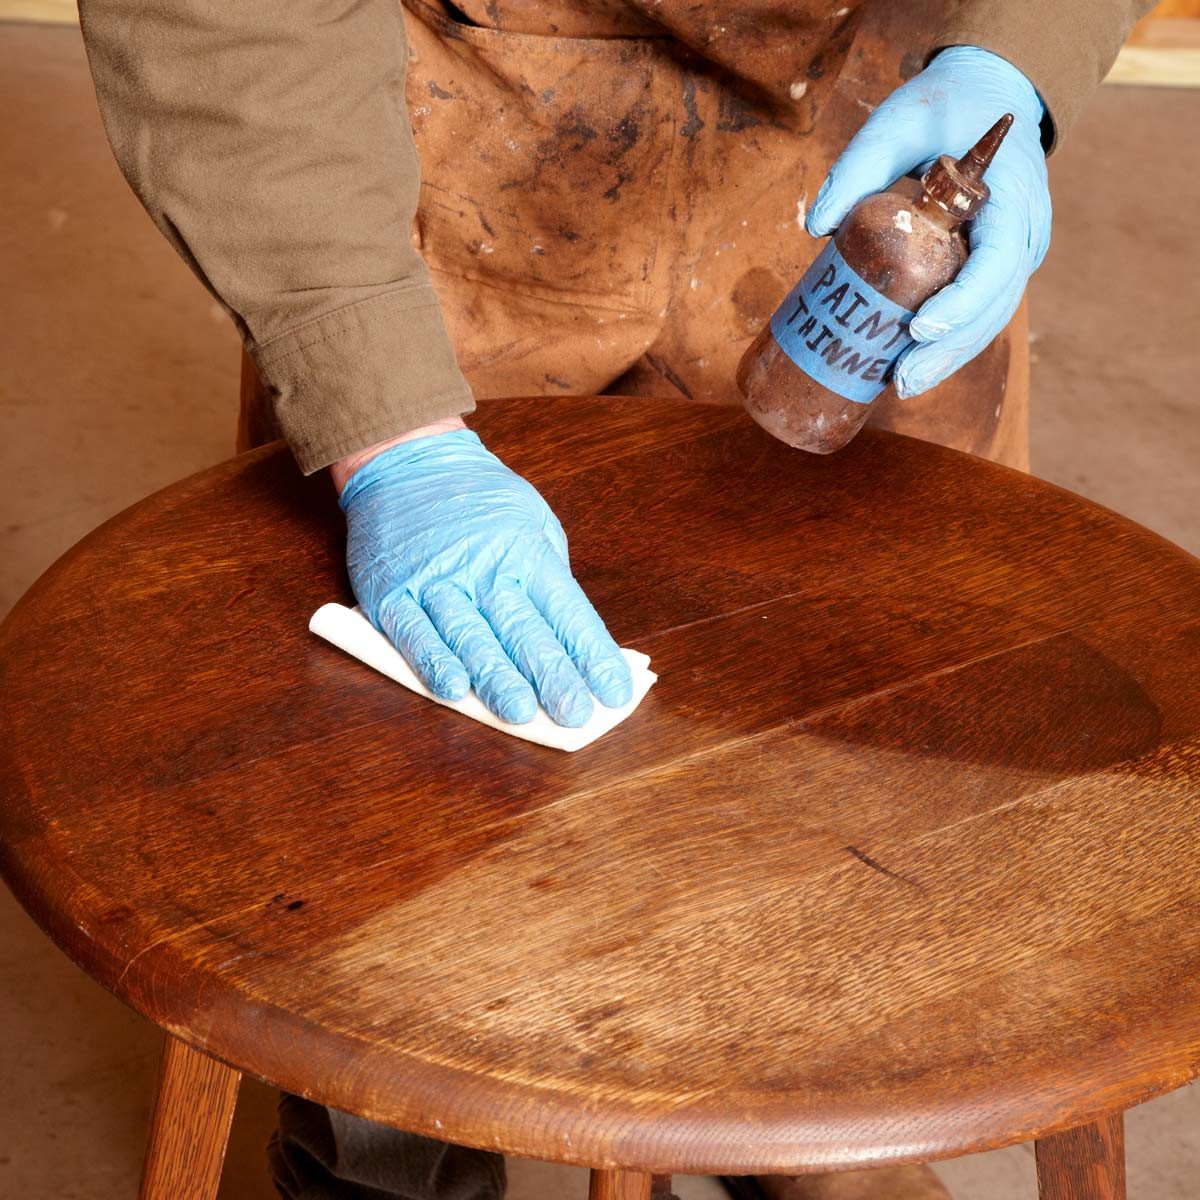 Cleaning and Refinishing Wood Furniture: Guide